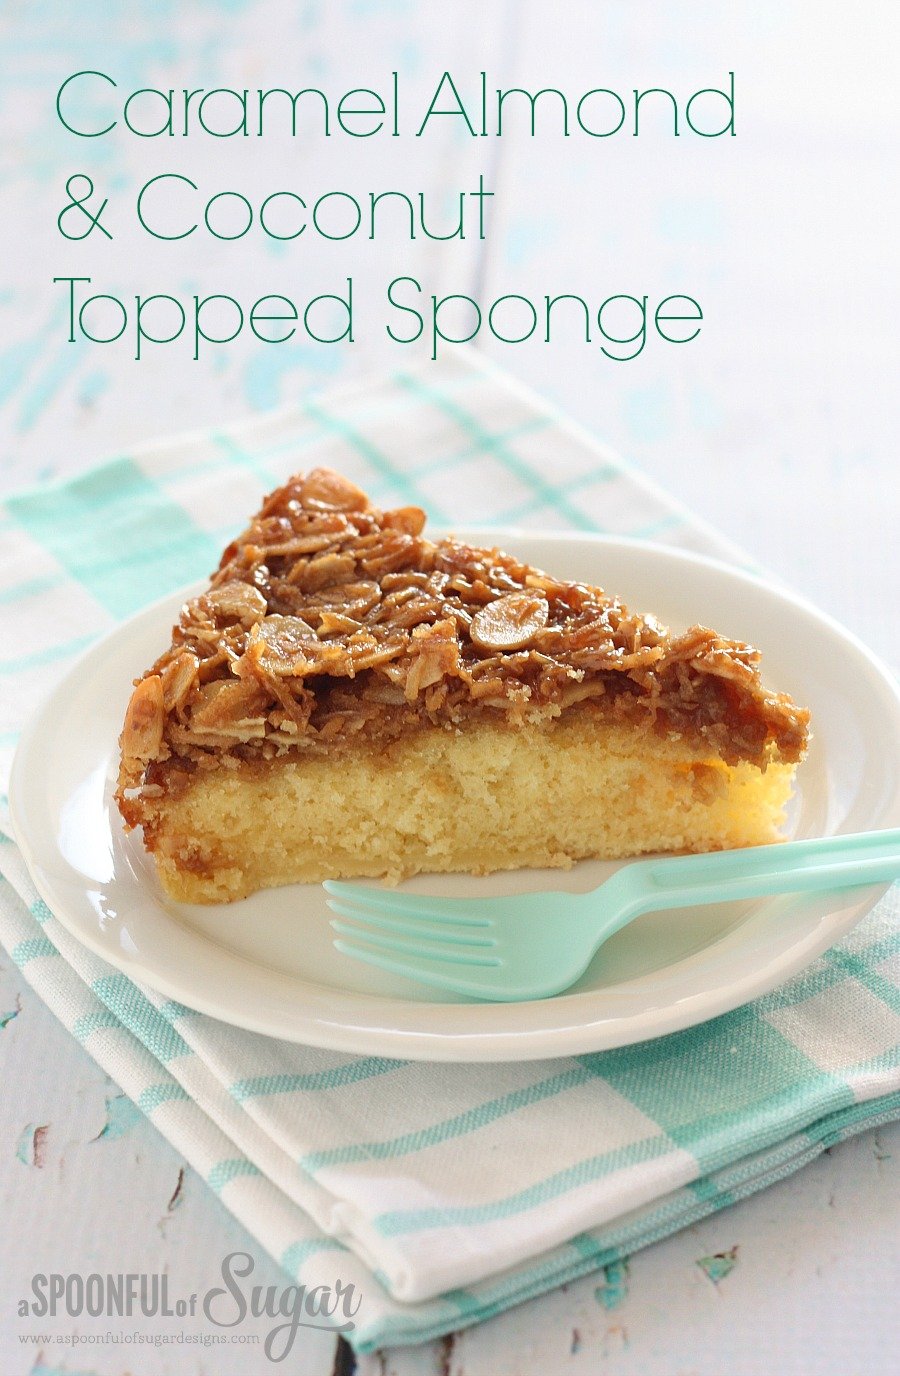 Caramel Almond and Coconut Topped Sponge